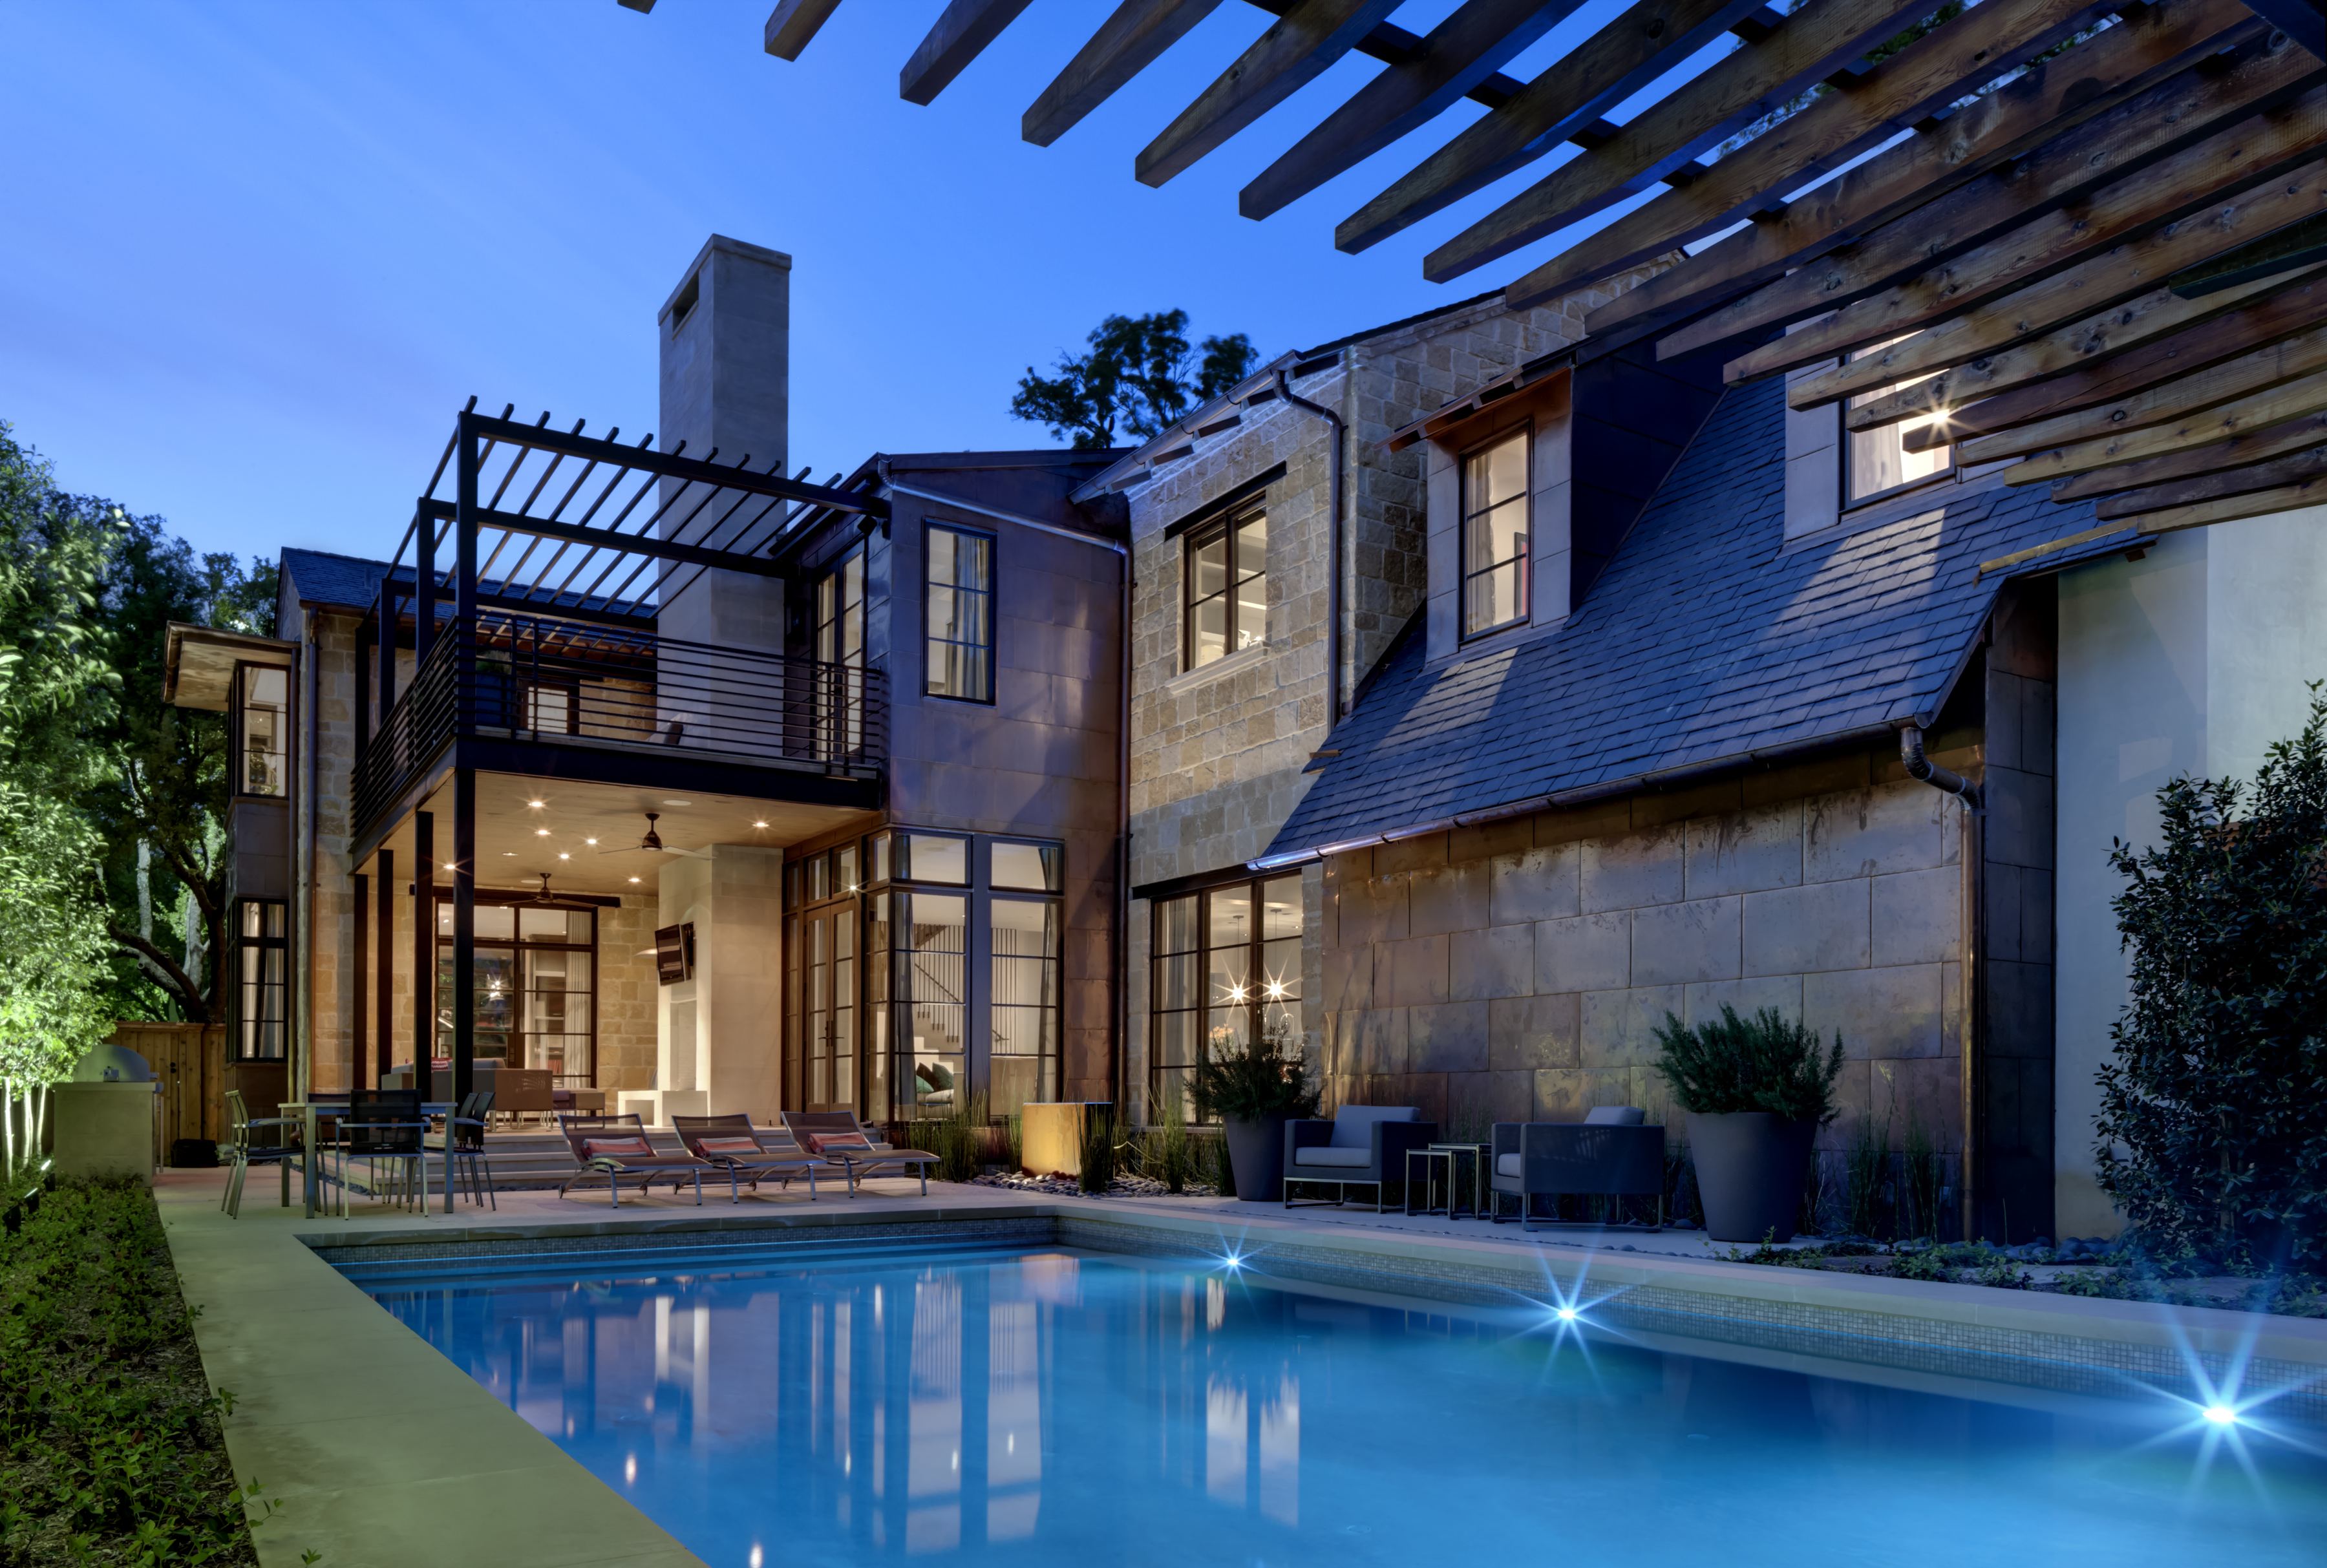 AIA Dallas Tour of Homes Features Modern Marvels From Local Architects